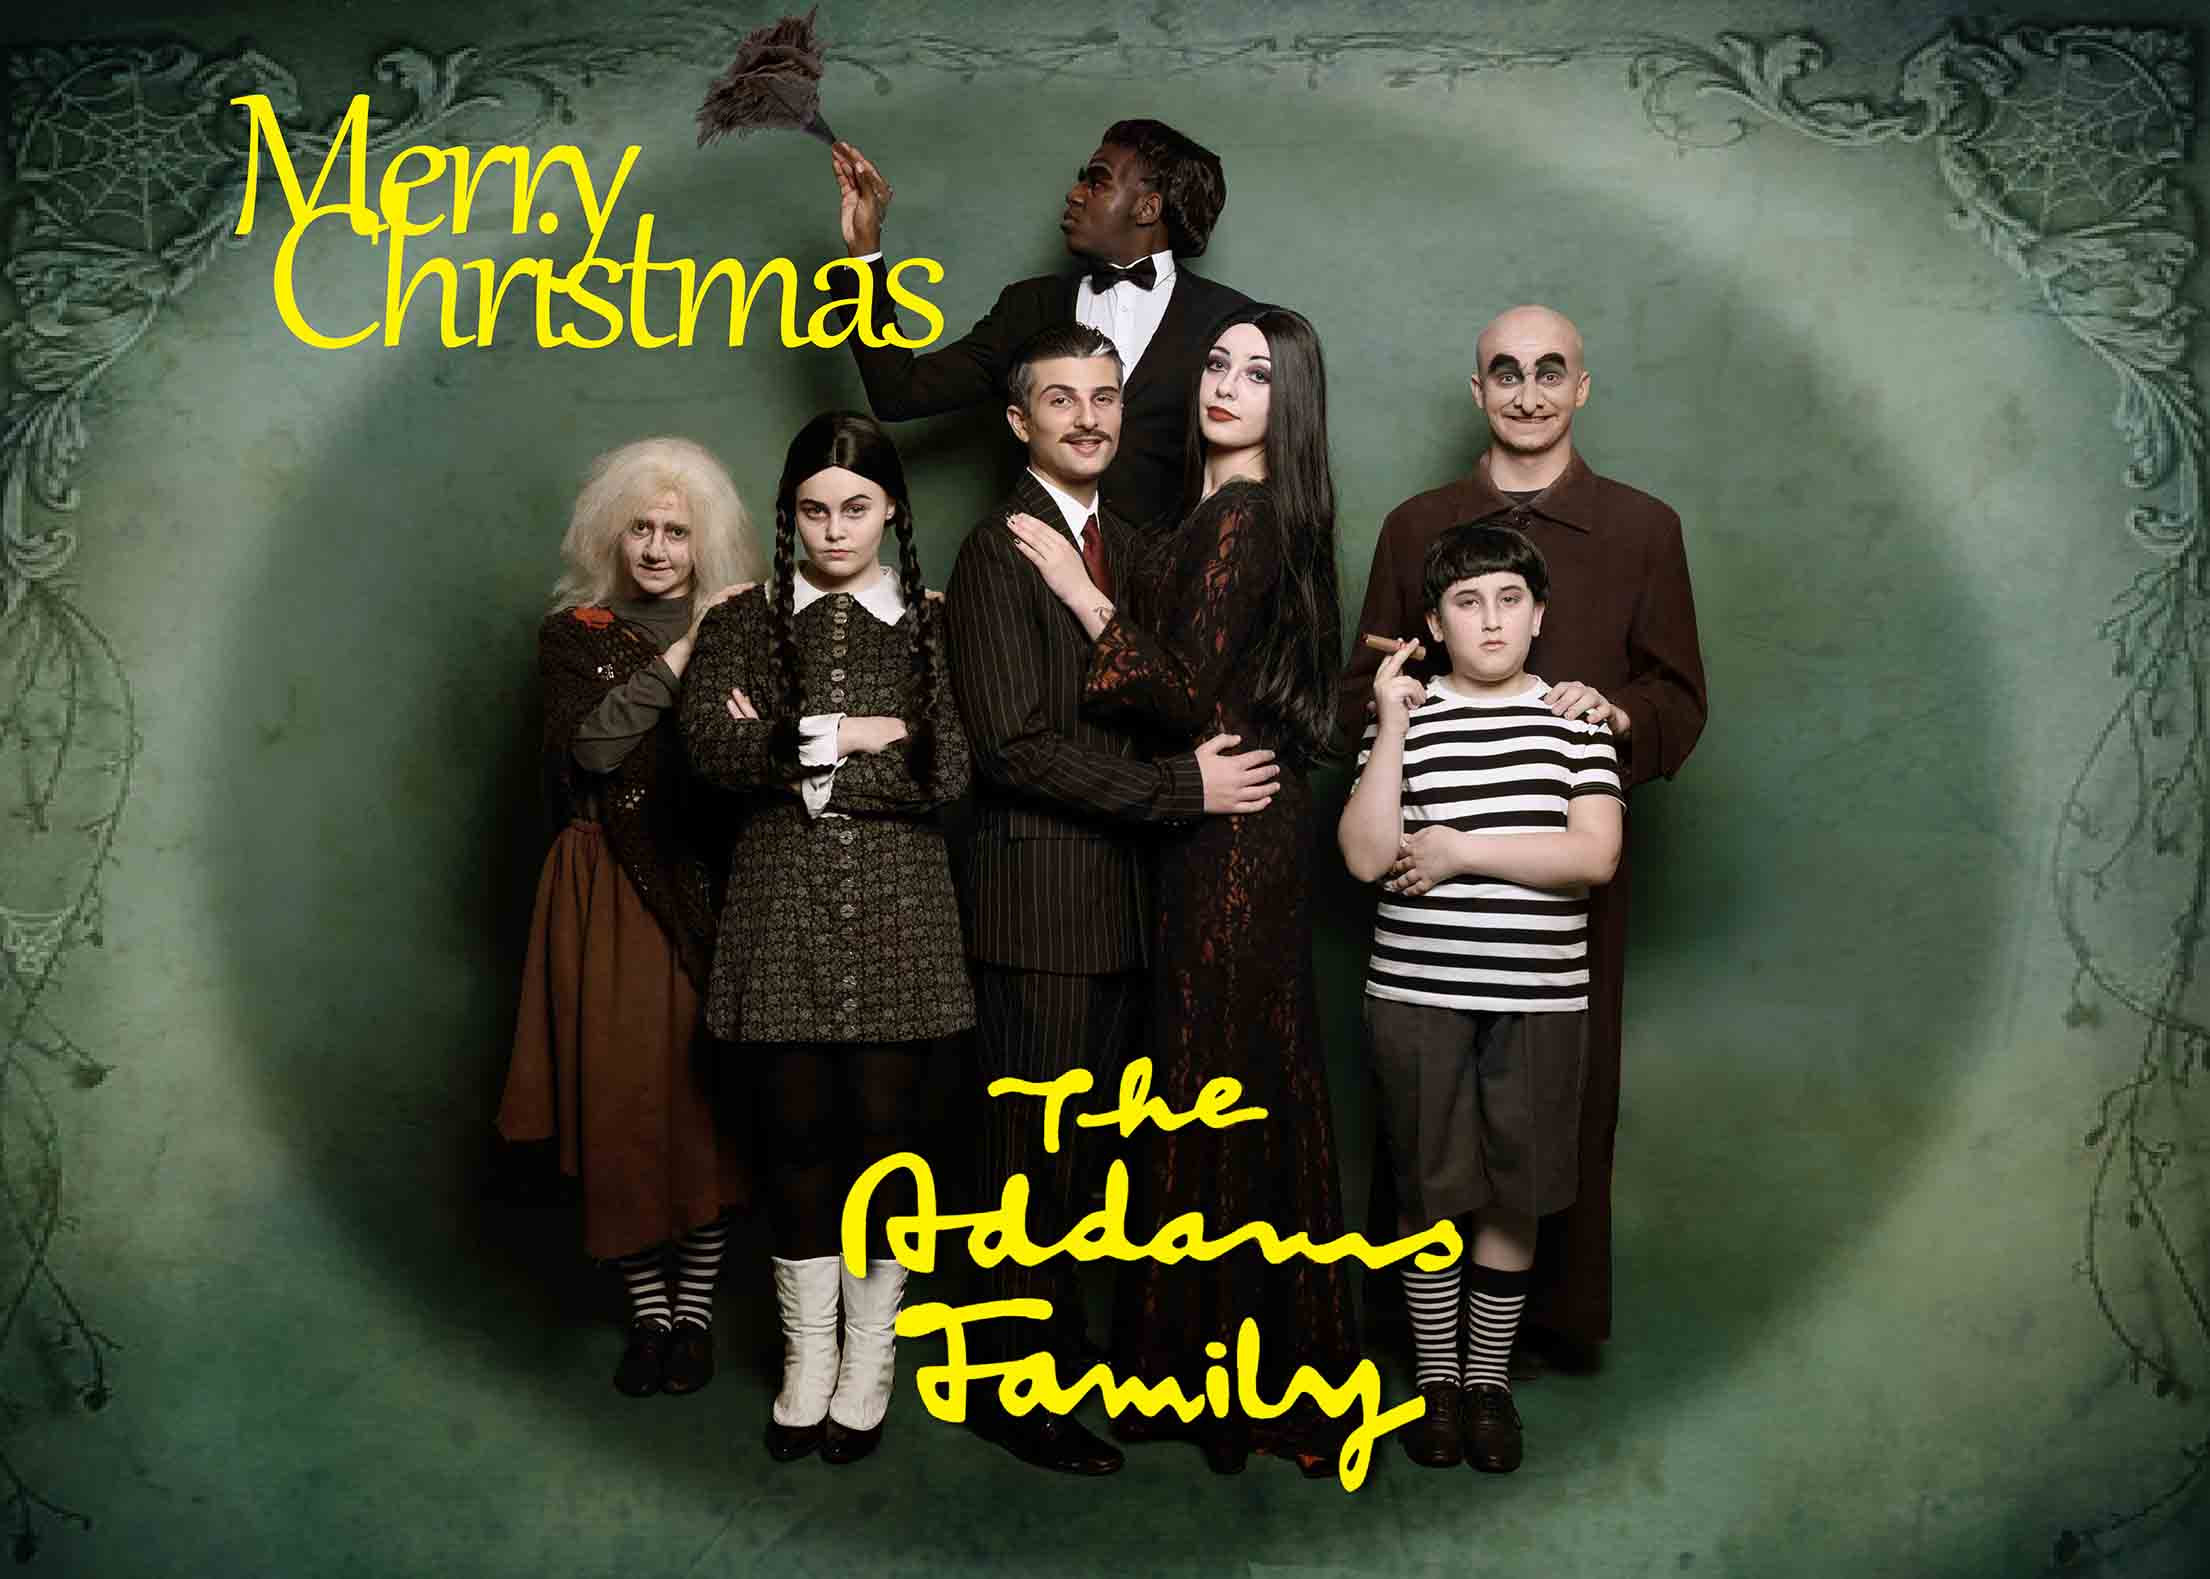 The Addams Family Brighton Theatre Groups production opens 18th February 2020 till 23rd February 2020